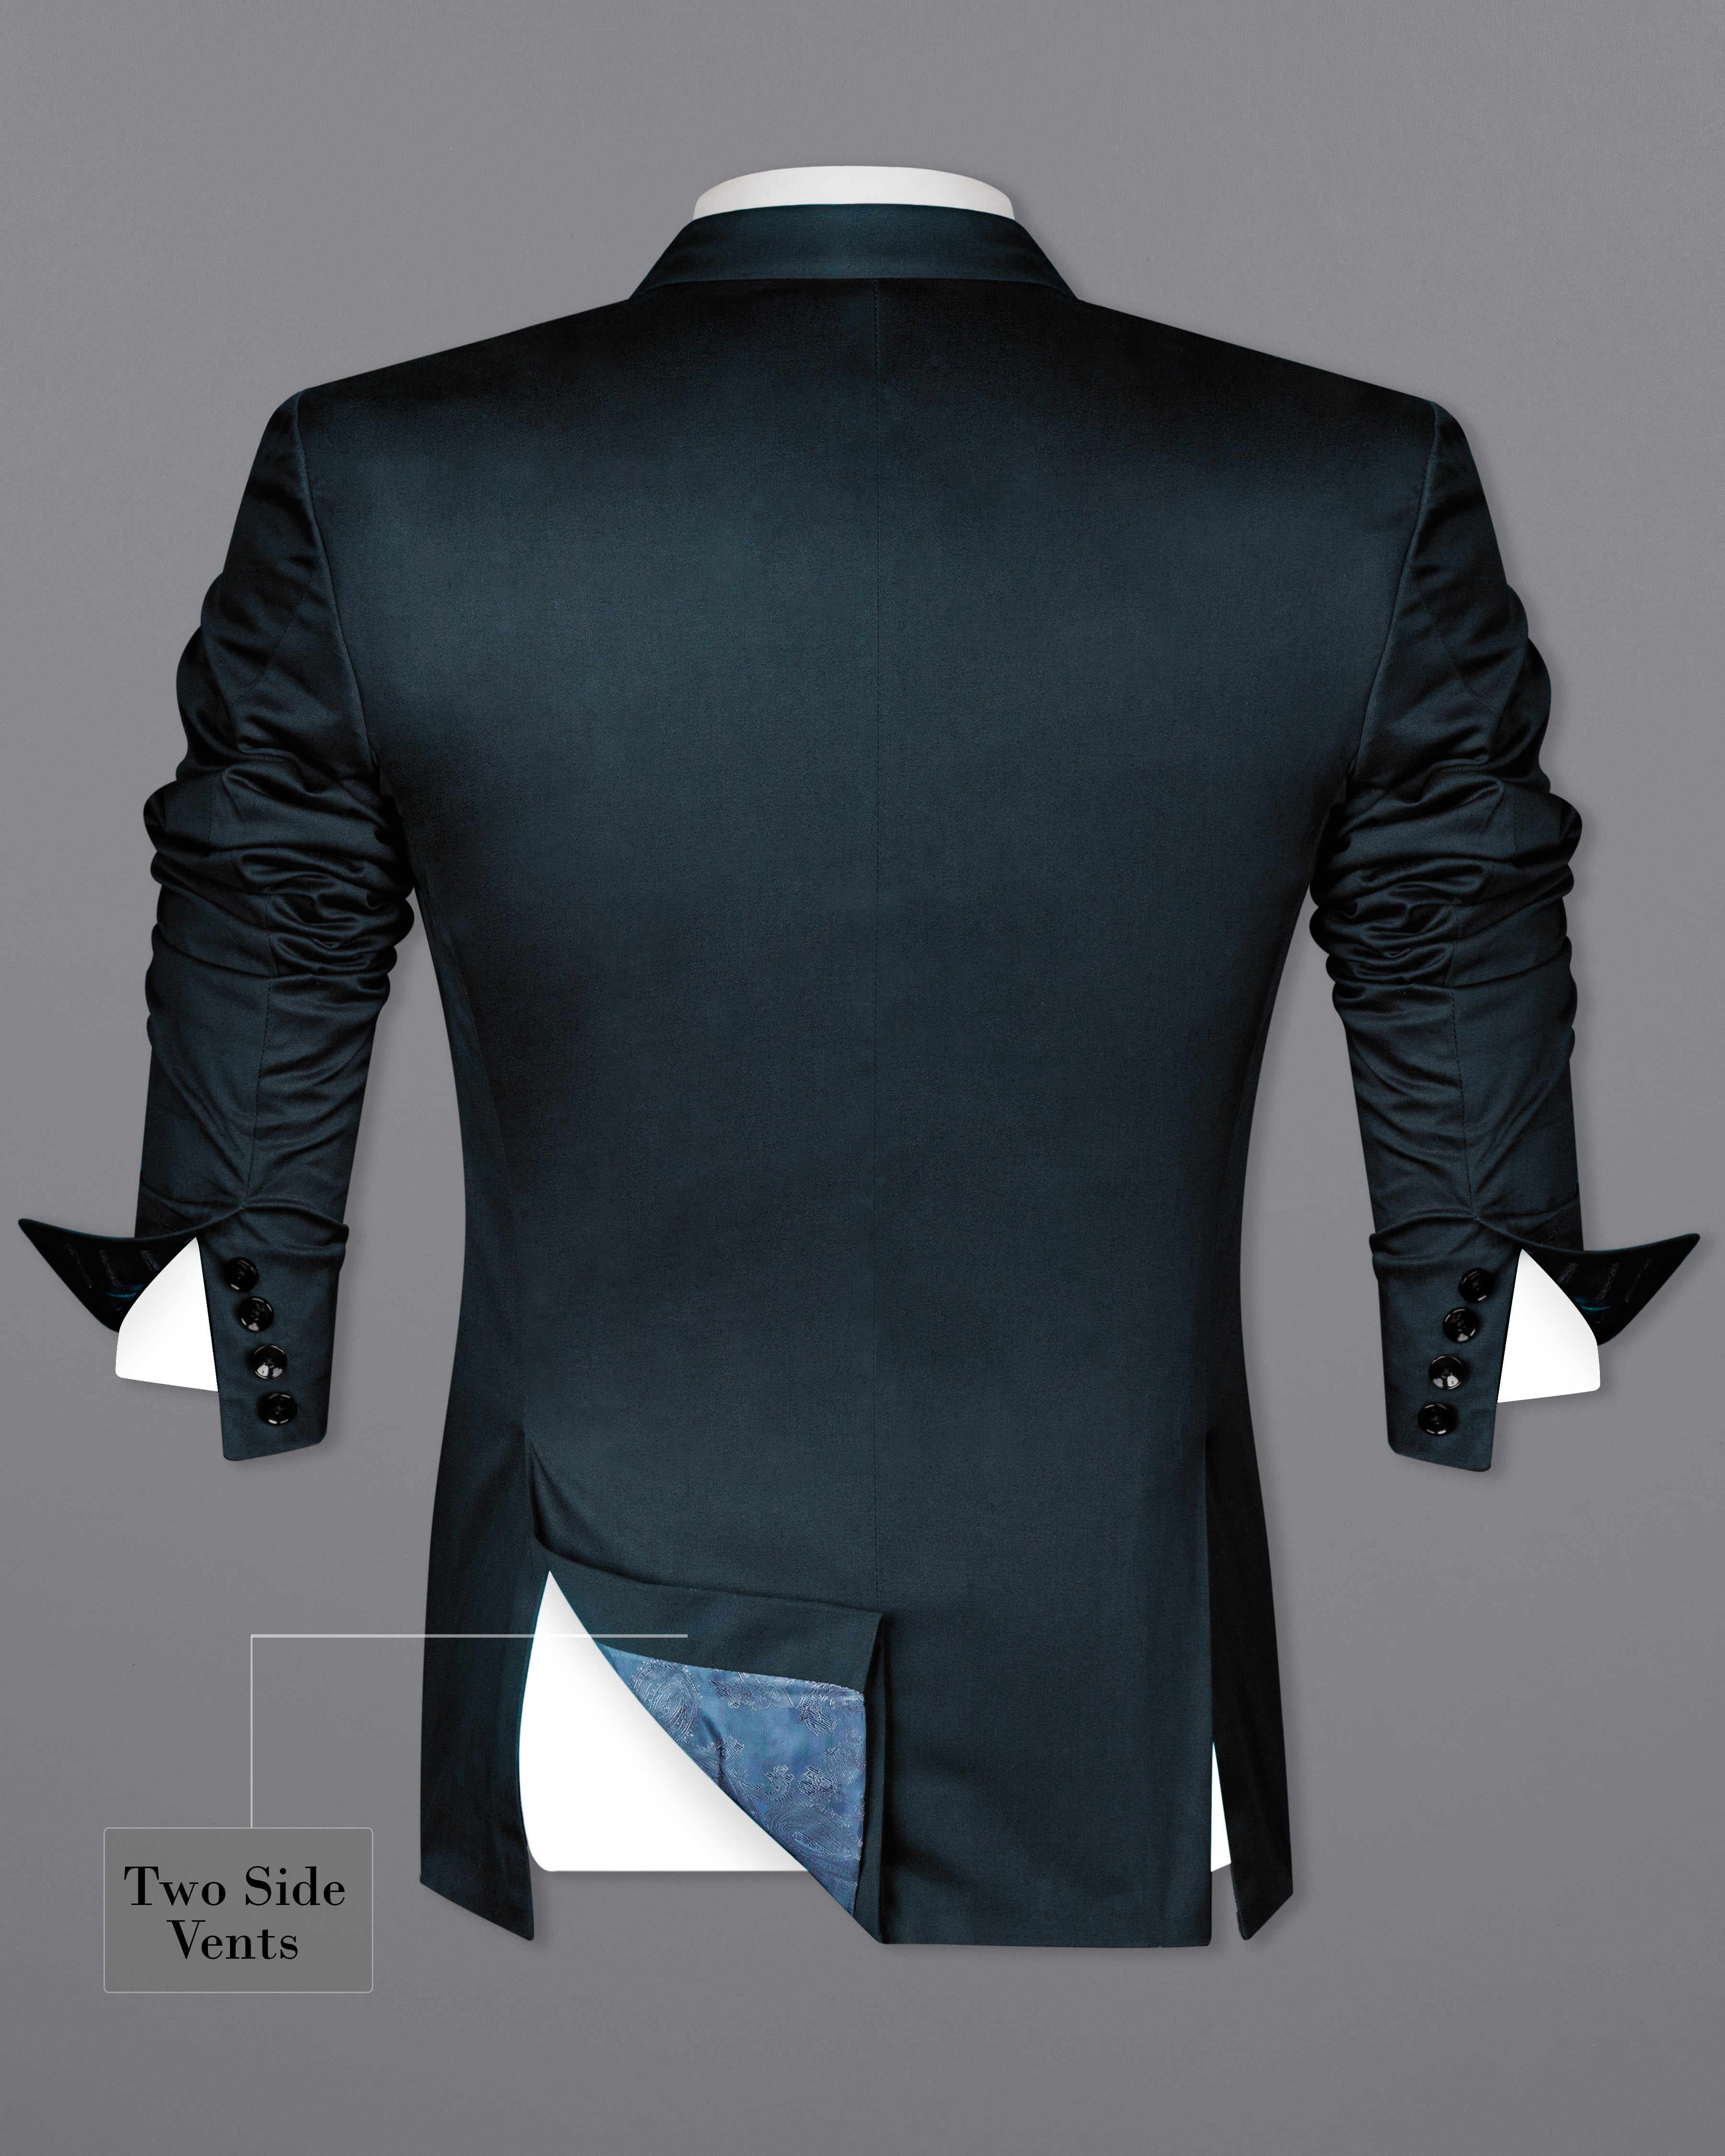 Timber Sea Blue Solid Stretchable Premium Cotton Traveler Suit ST2637-SB-36, ST2637-SB-38, ST2637-SB-40, ST2637-SB-42, ST2637-SB-44, ST2637-SB-46, ST2637-SB-48, ST2637-SB-50, ST2637-SB-52, ST2637-SB-54, ST2637-SB-56, ST2637-SB-58, ST2637-SB-60